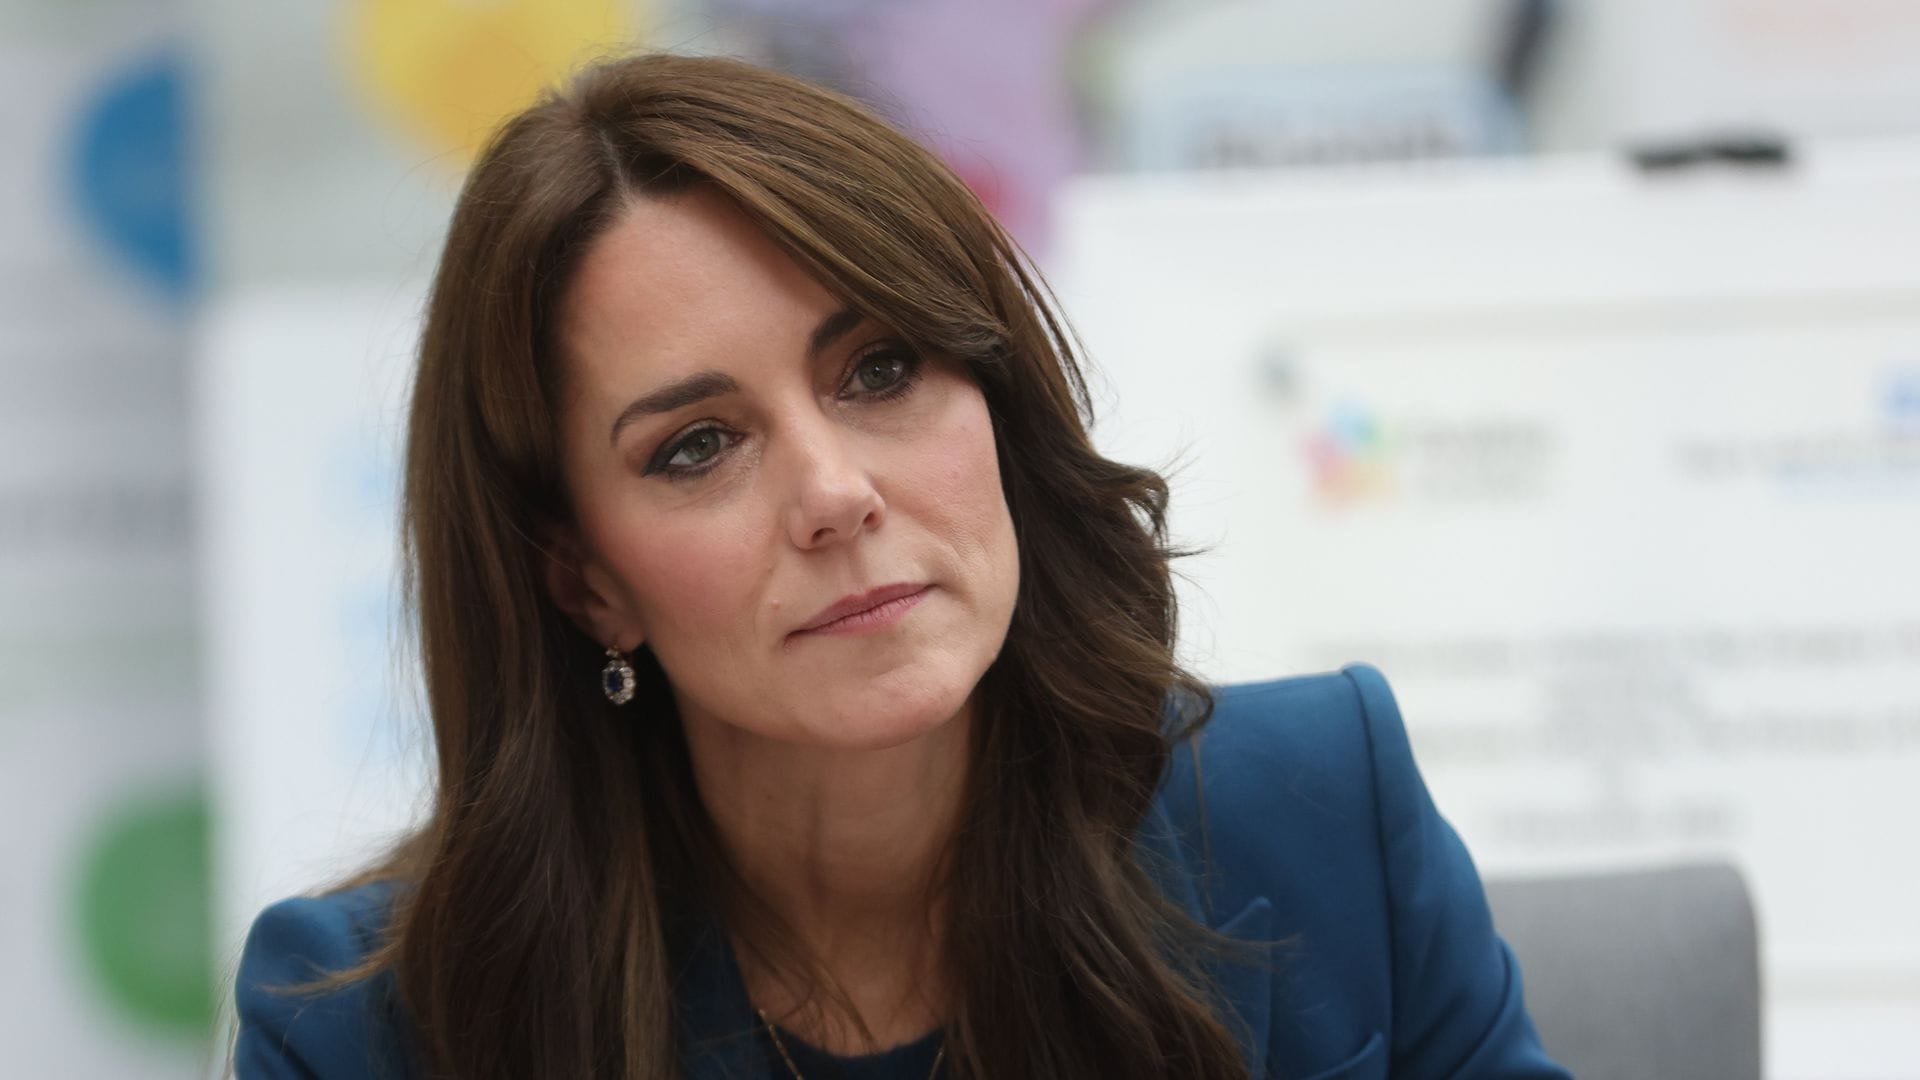 How Kate Middleton's family has supported her through difficult times